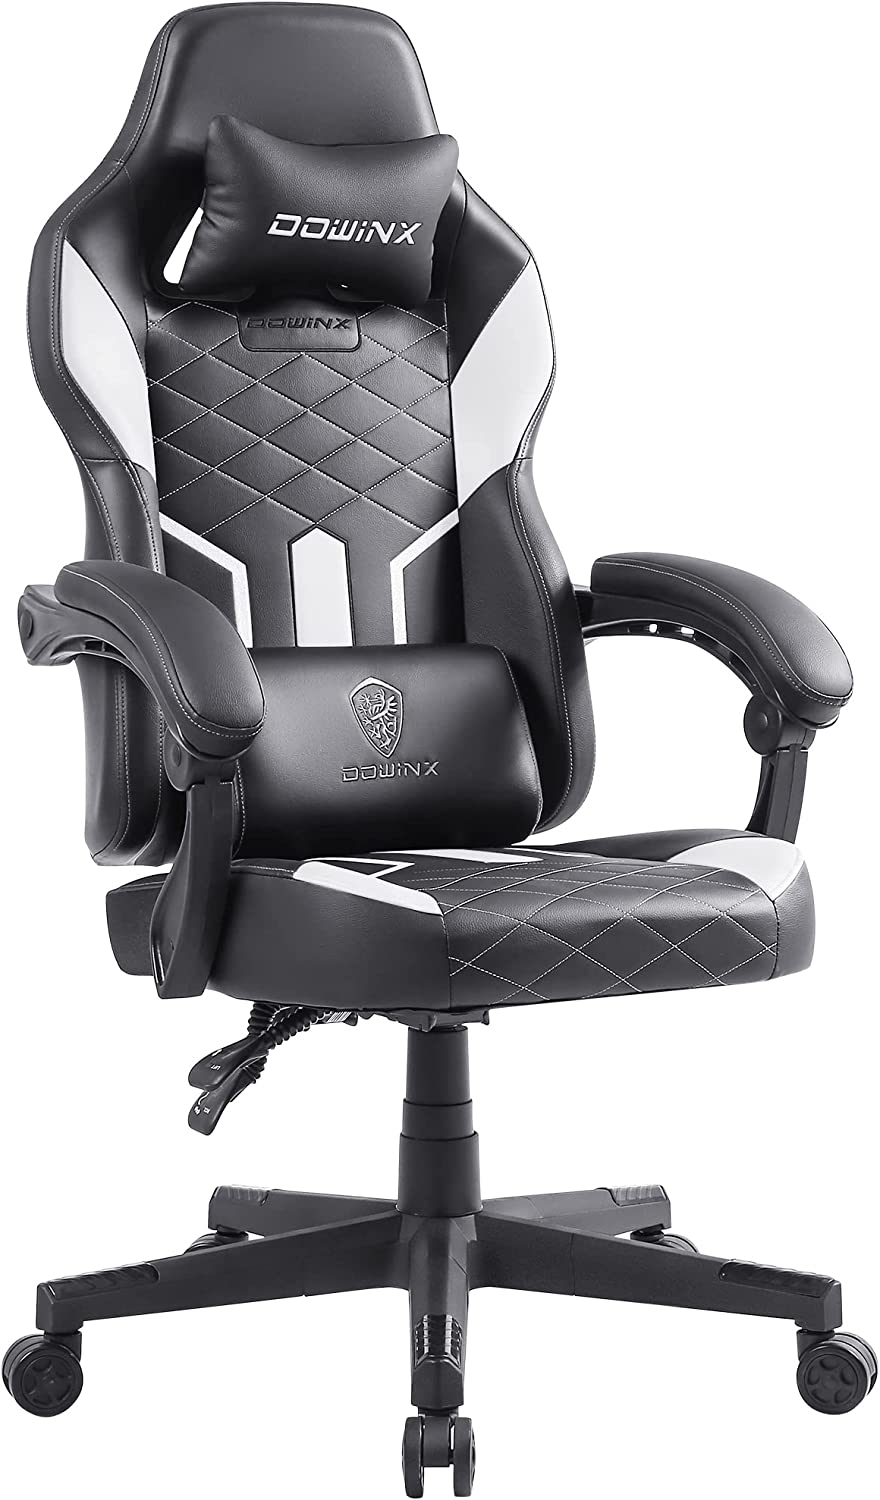 Dowinx Gaming Chair Unboxing and Assembling 